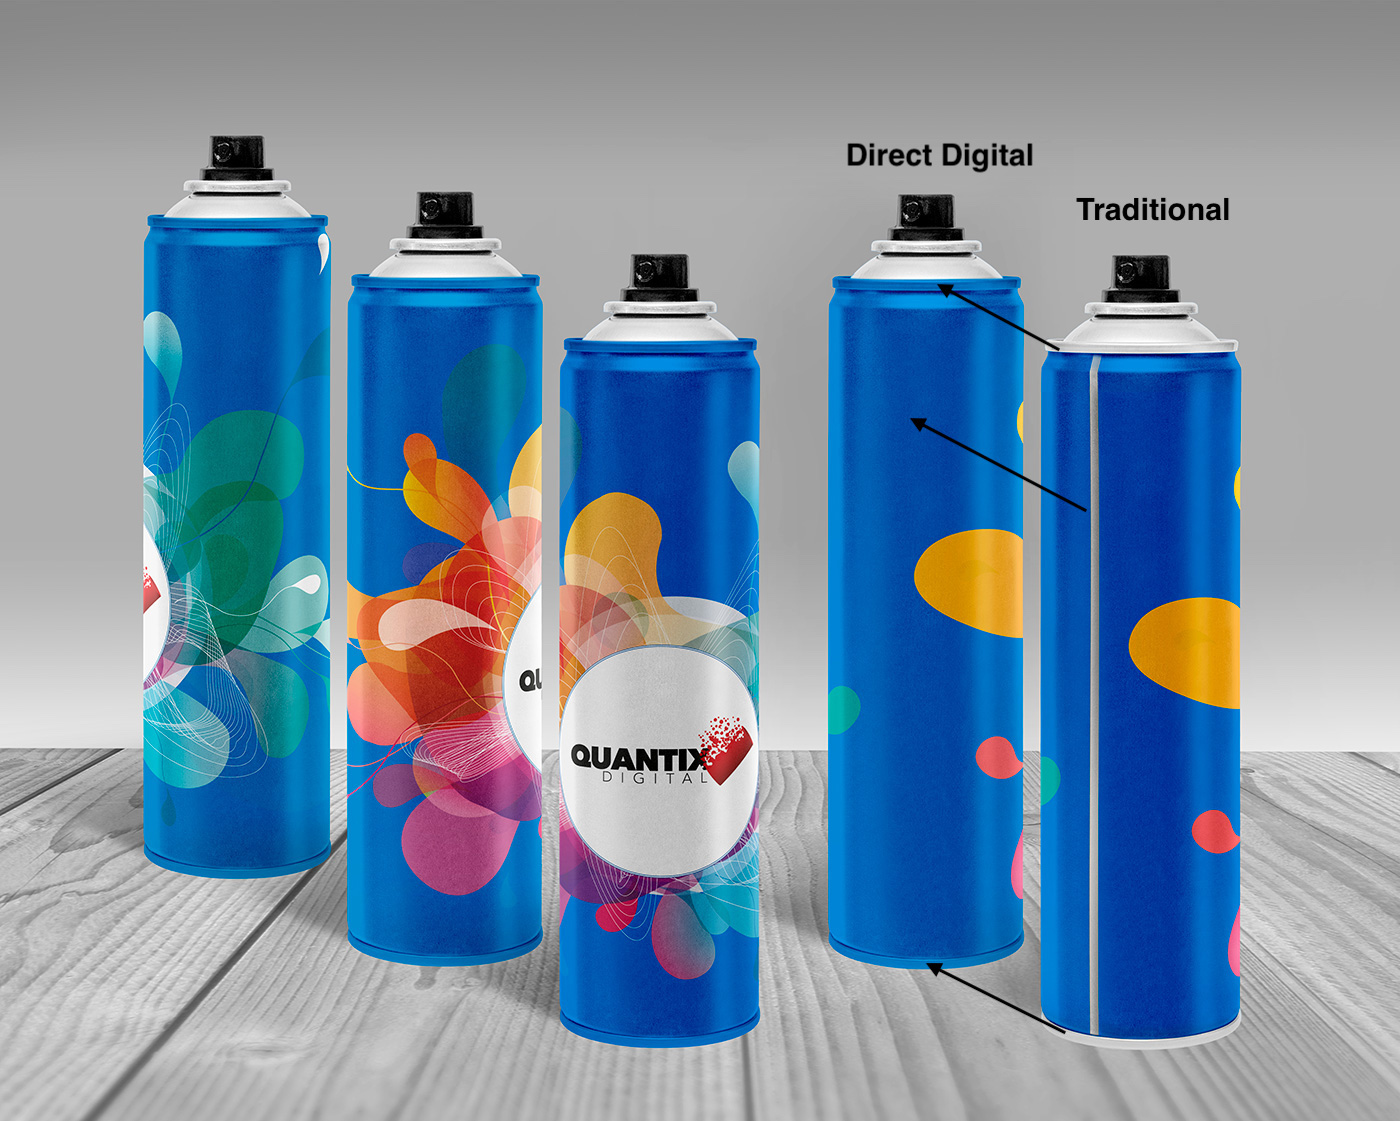 replacing shrink sleeves with direct digital printing